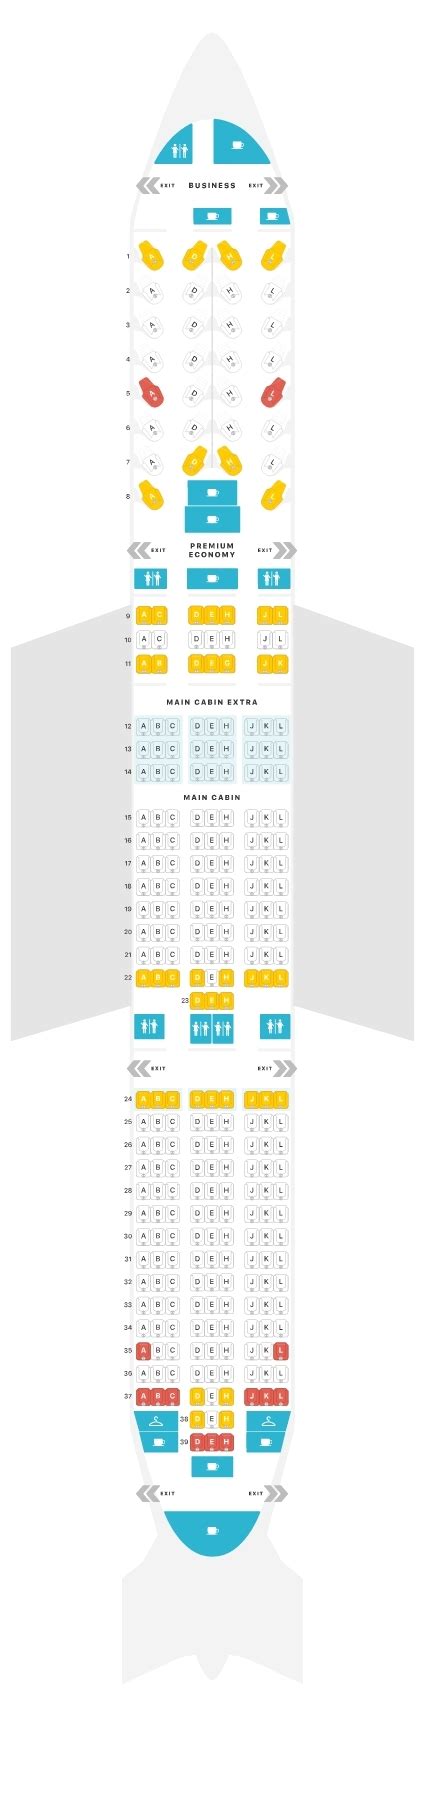 For your next American Airlines flight, use this seating chart to get the most comfortable seats, legroom, and recline on .. 